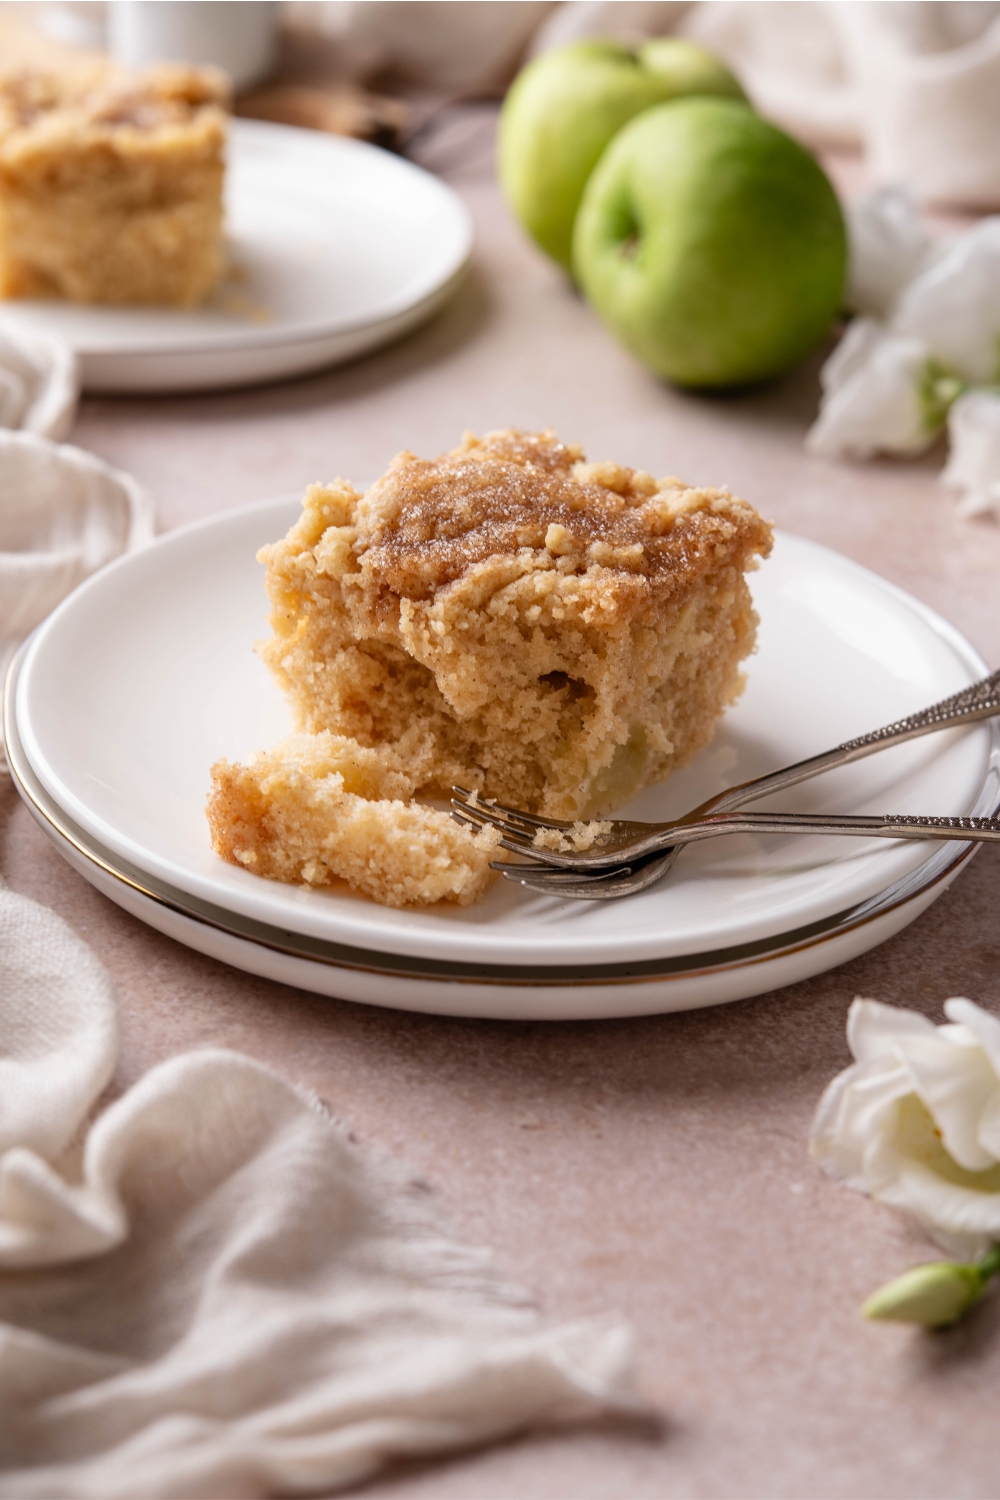 A plate with Apple Coffee Cake and two forks next to it.